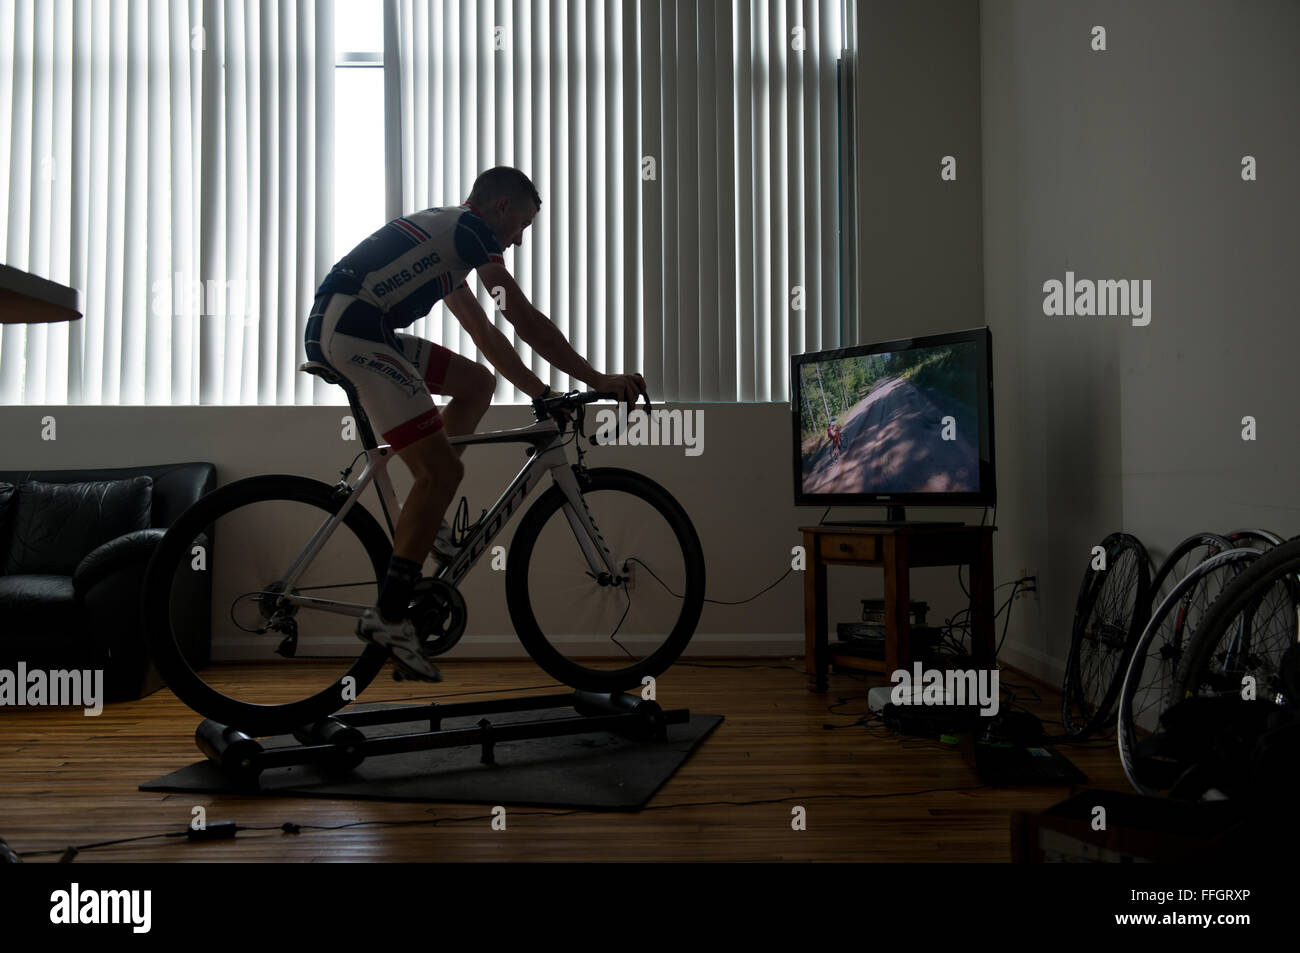 Even if Senior Airman David Flaten isn't biking outside, sometimes he'll work out in his apartment by riding his bike on a stationary machine. While he works out, he often watches a bike race, including one he participates in annually near his hometown in Wisconsin, to help motivate him. Stock Photo